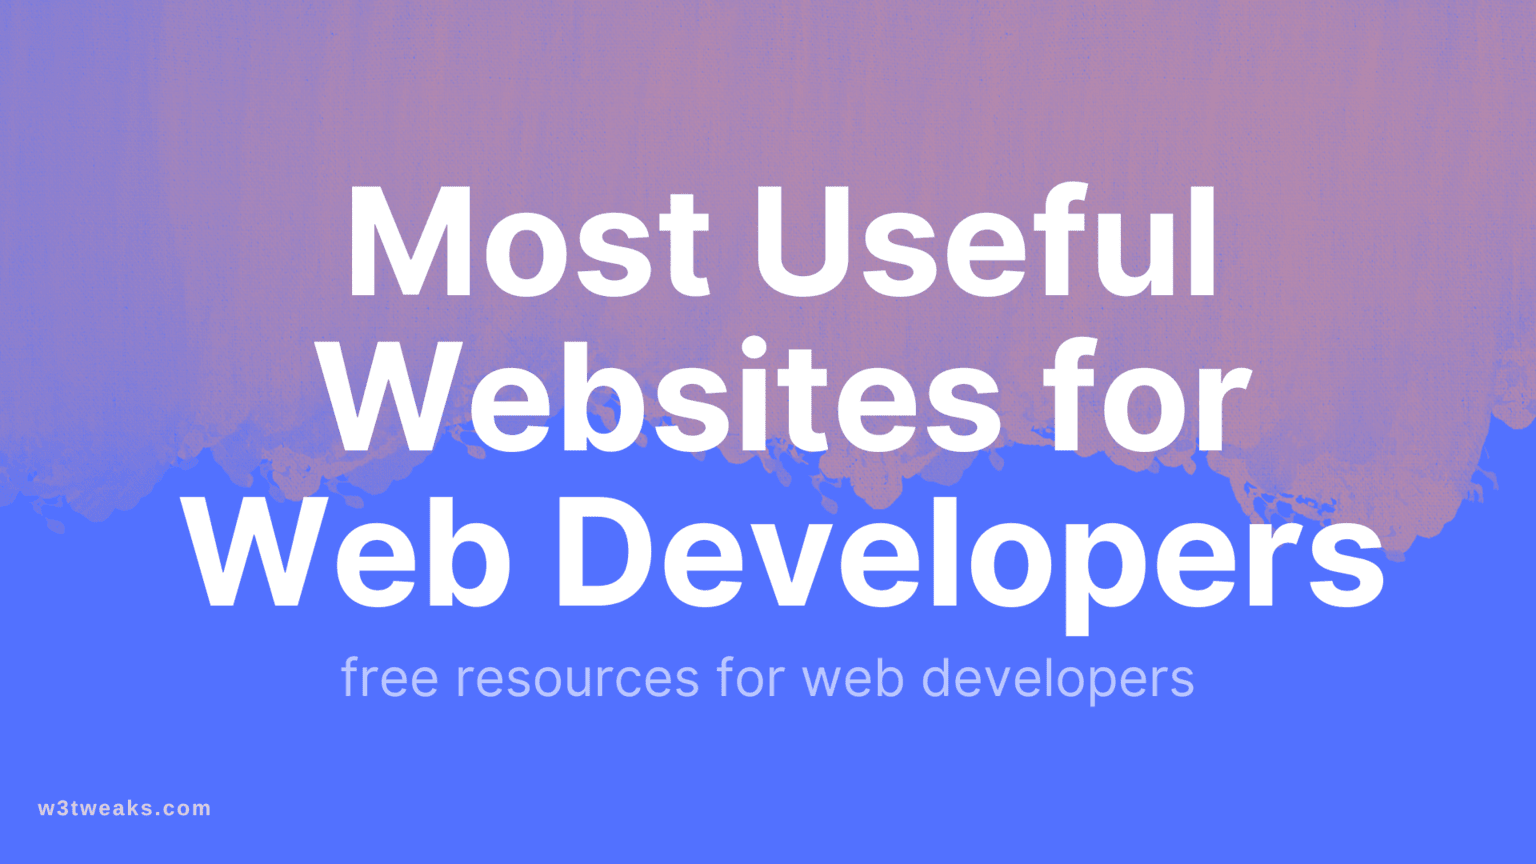 11 Websites for Web Developers that will help you learn web development